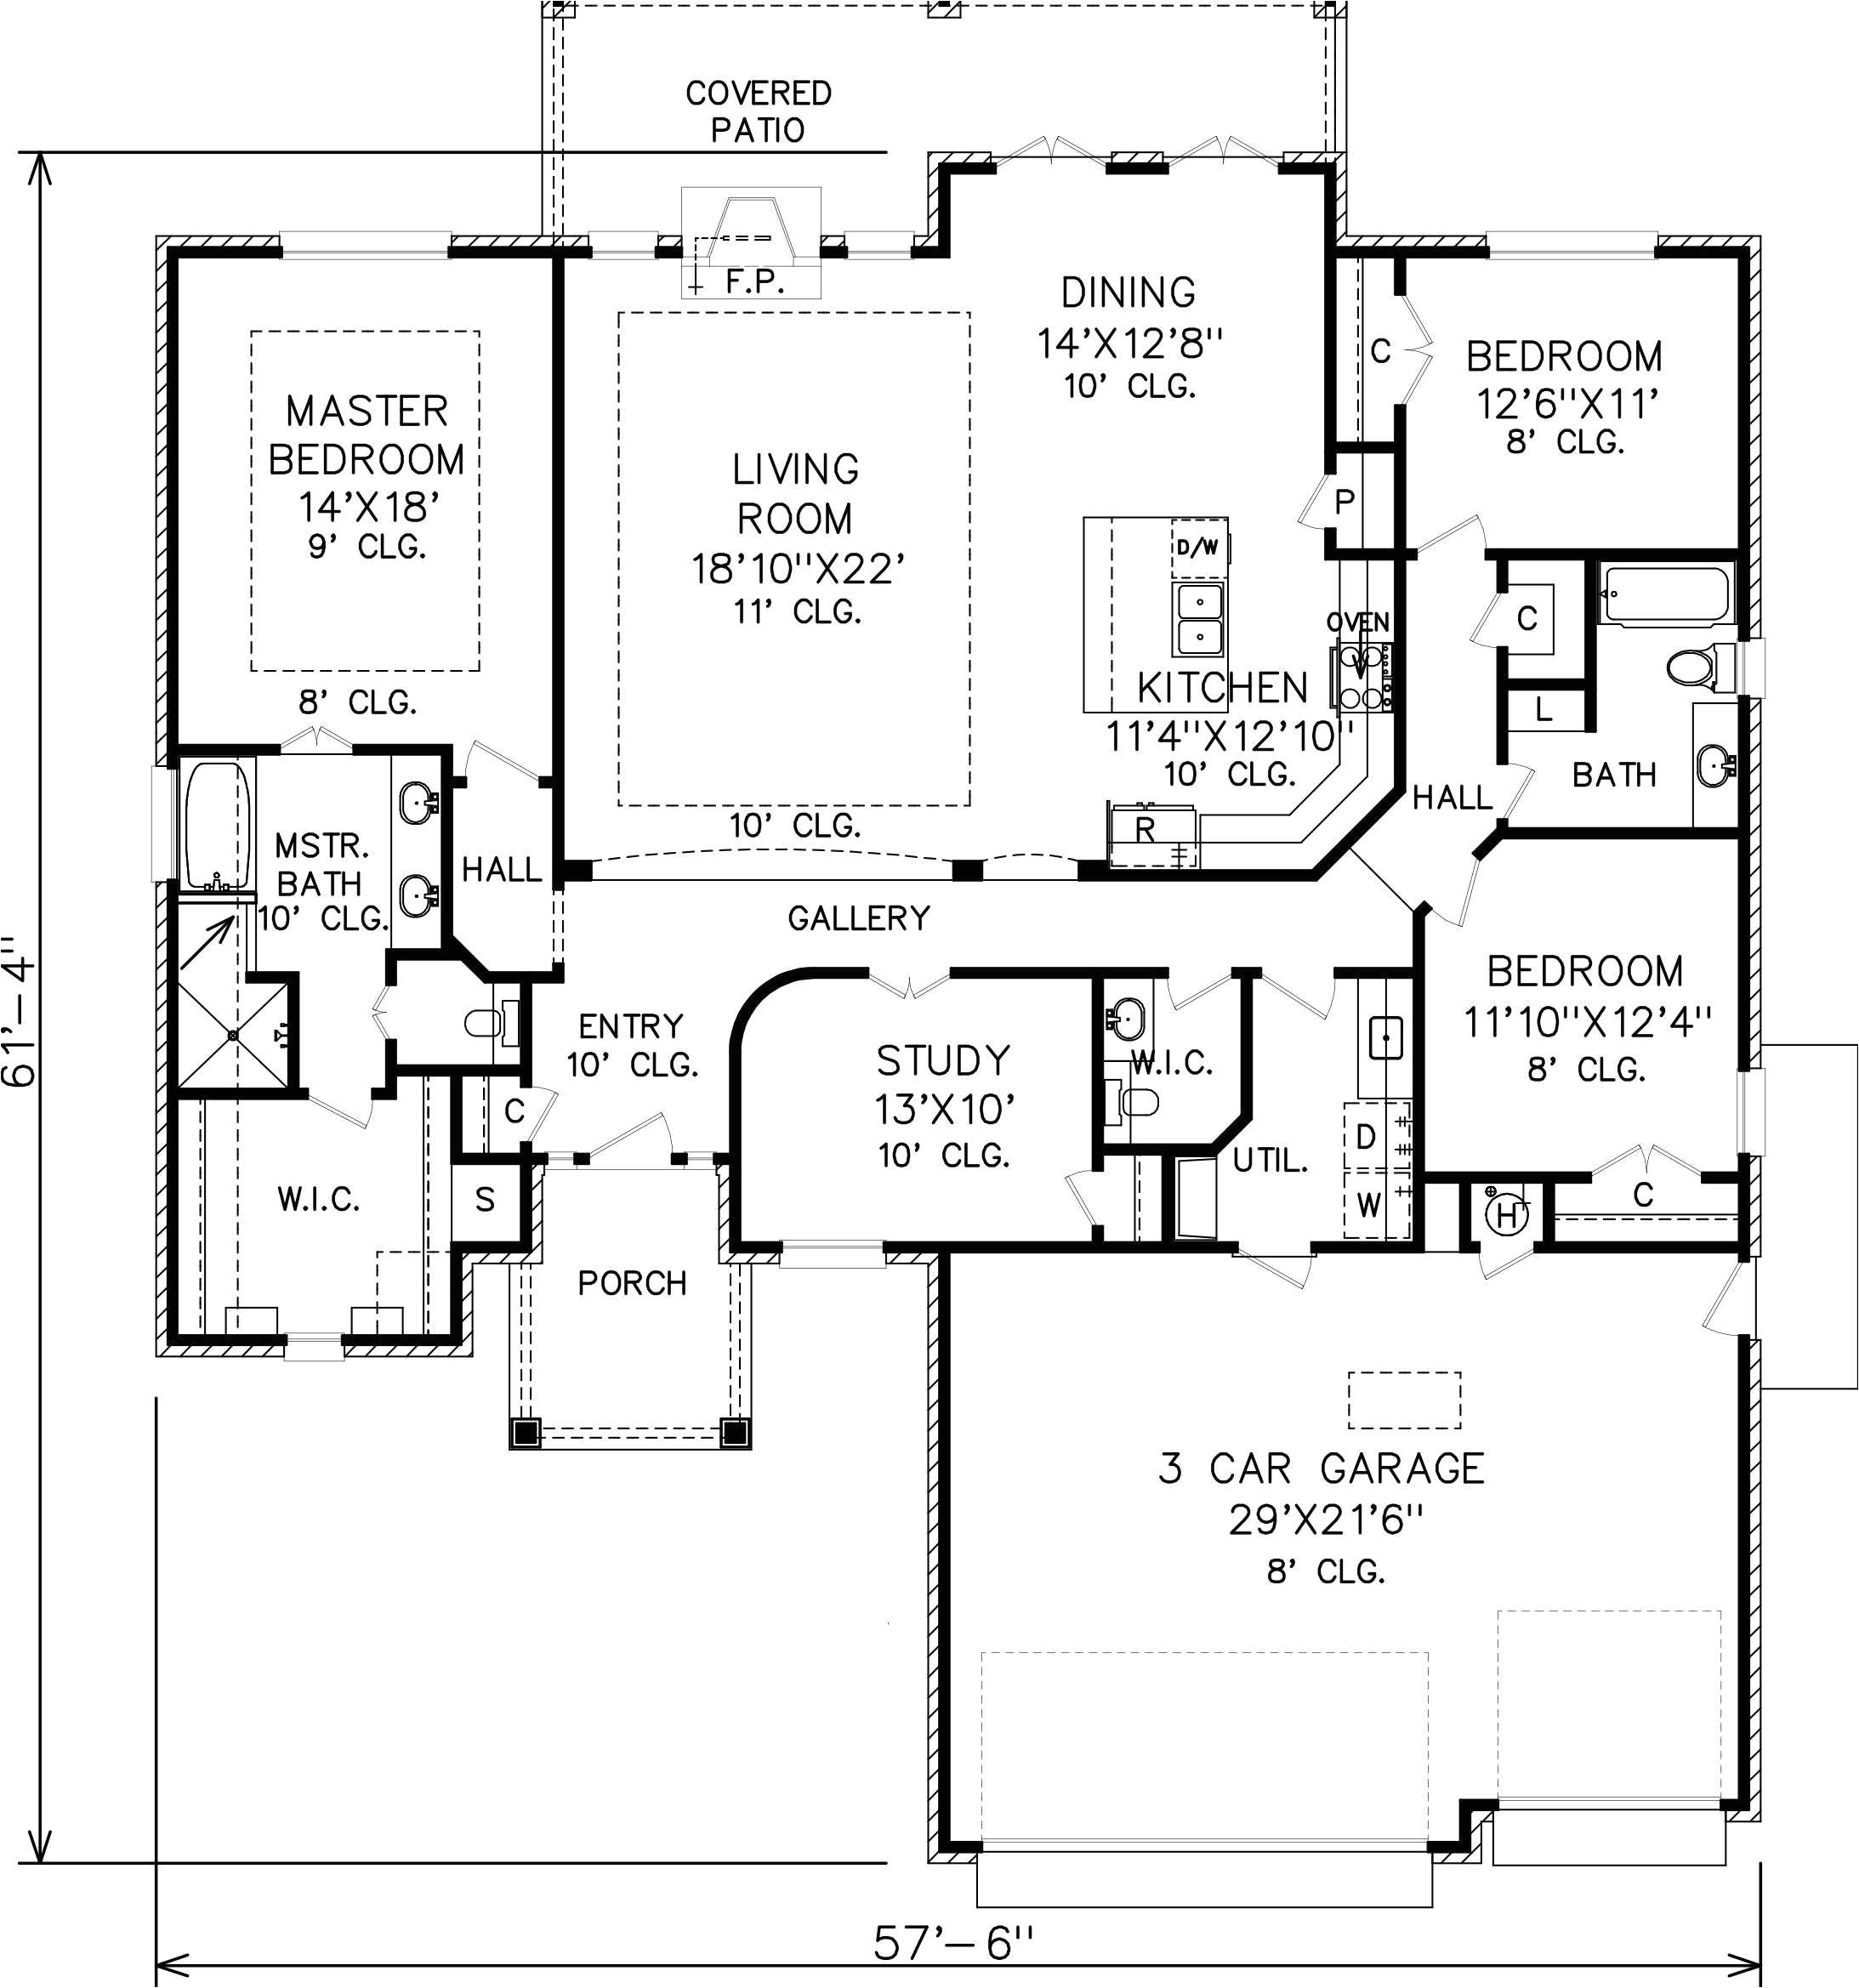 1500 sq foot house plans inspirational 20 x 40 house plans lovely 30 ft wide house